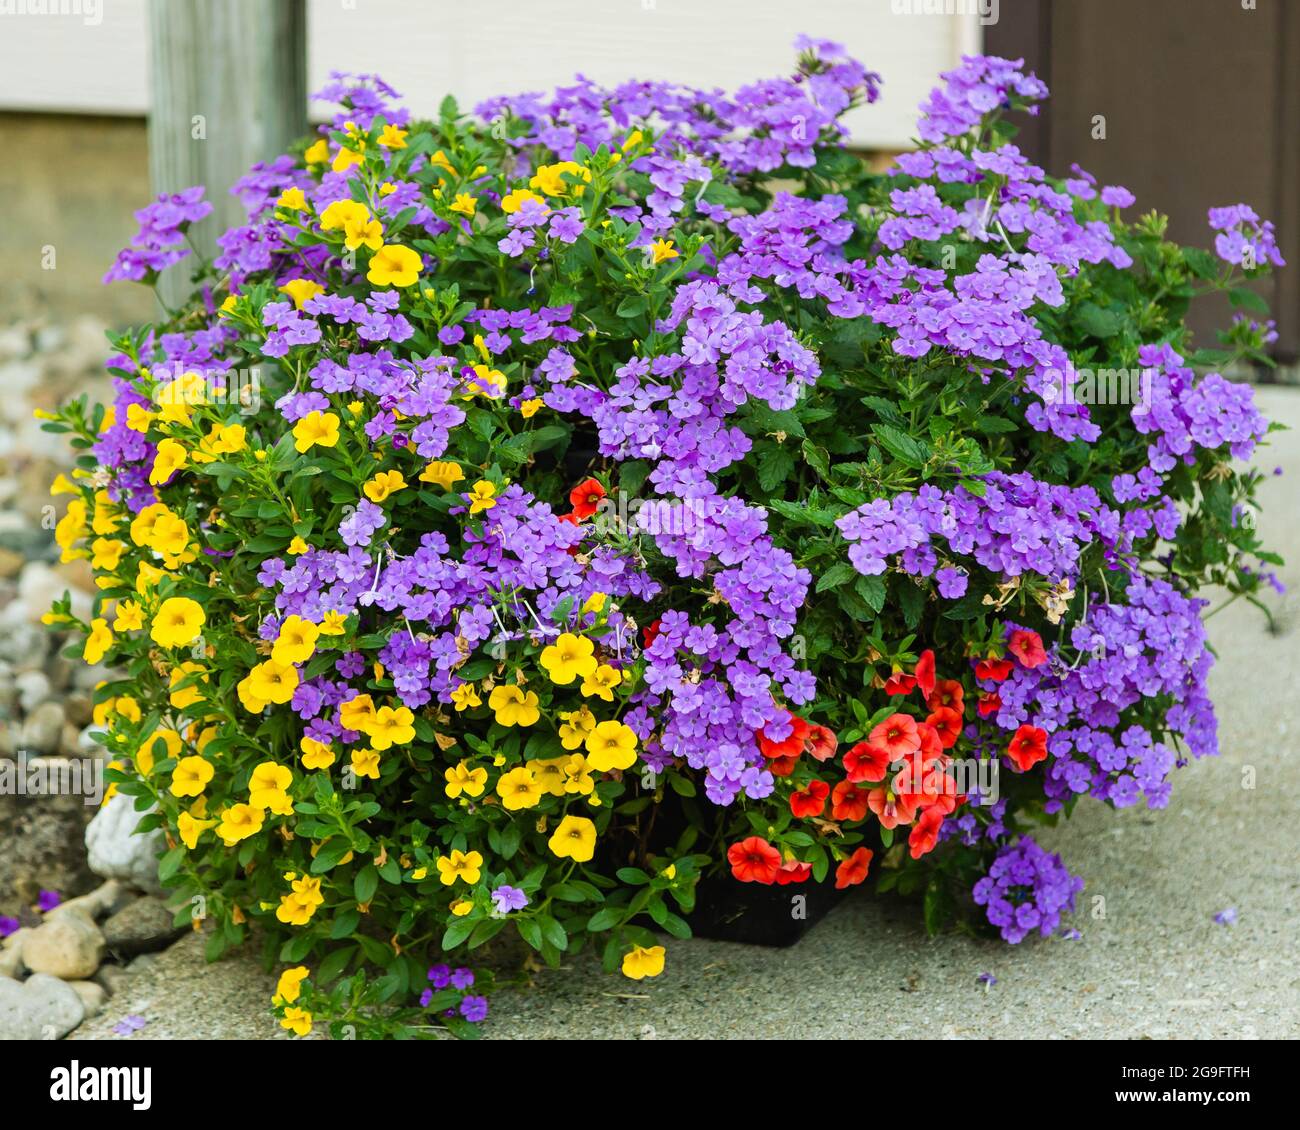 the purple garden phlox is taking over this planter Stock Photo